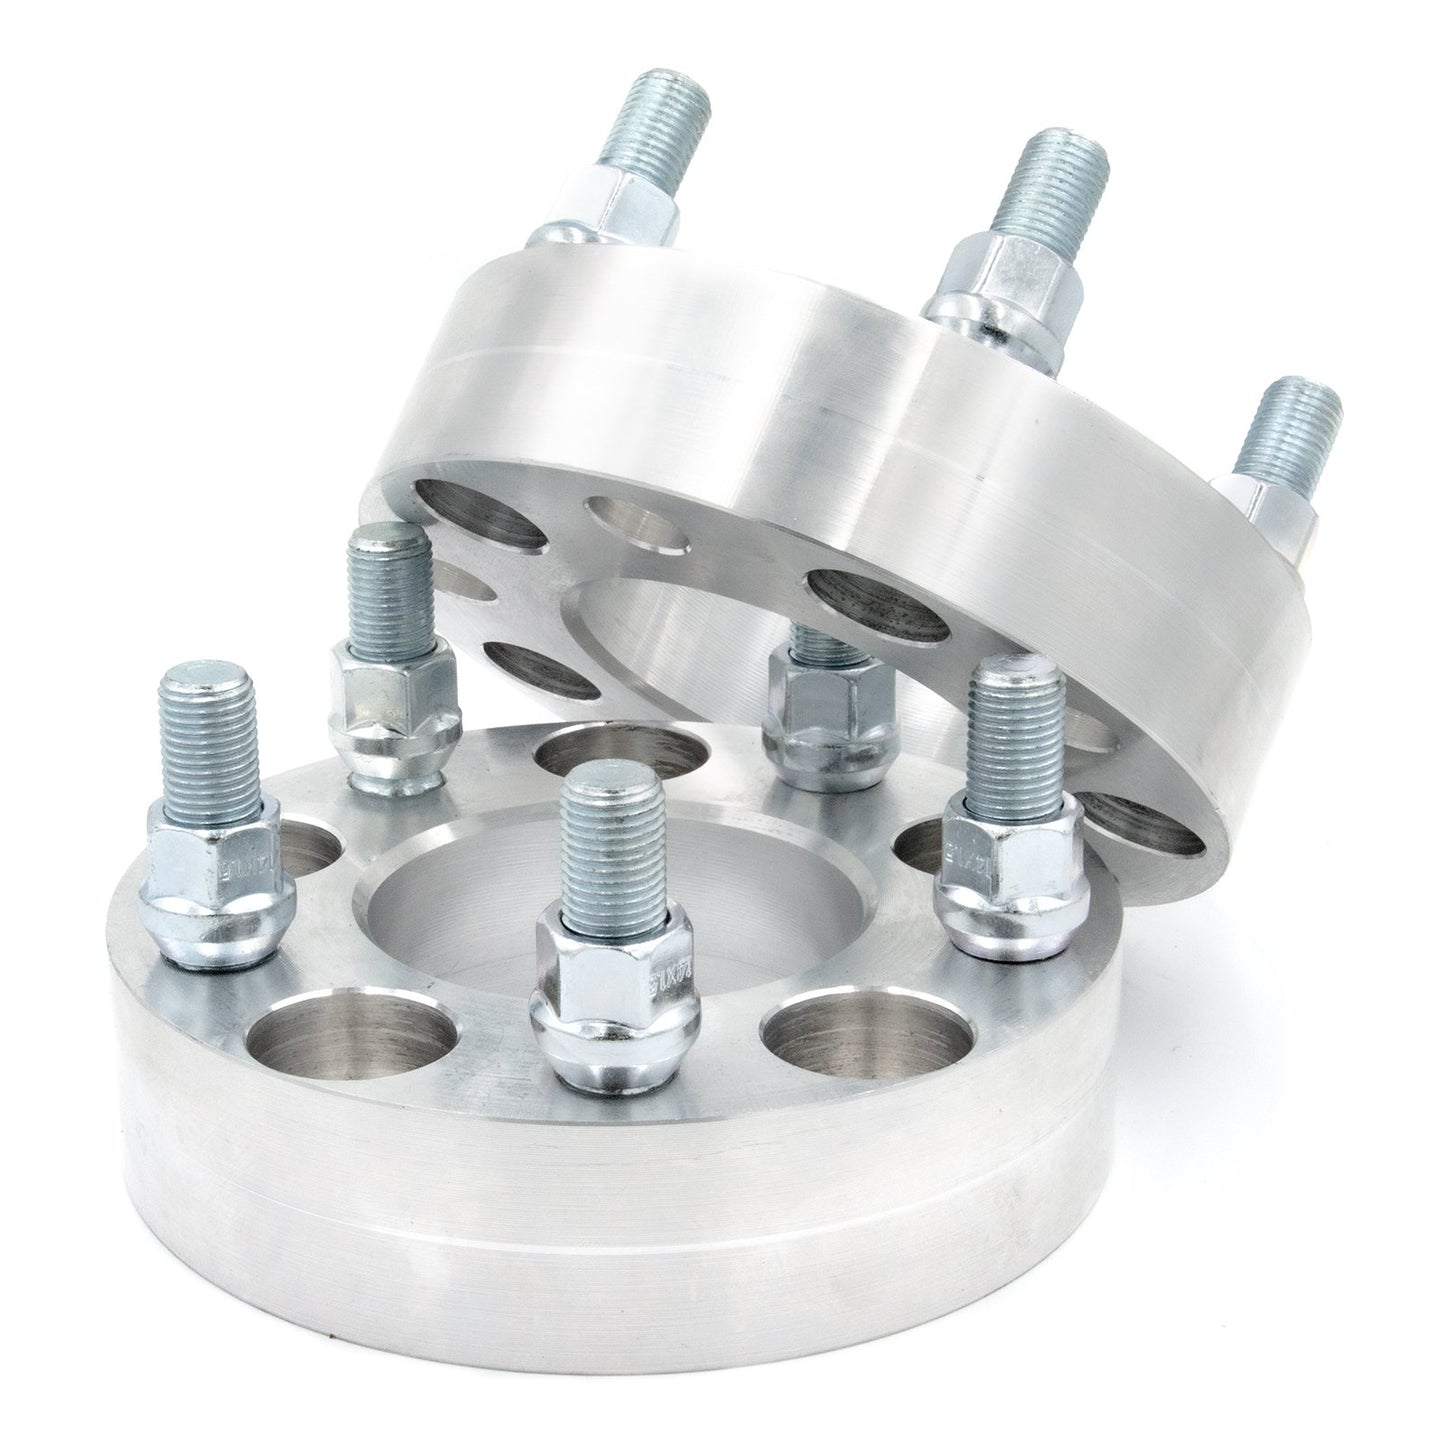 5x5" to 5x130 Wheel Spacer/Adapter - Thickness: 3/4"- 4"